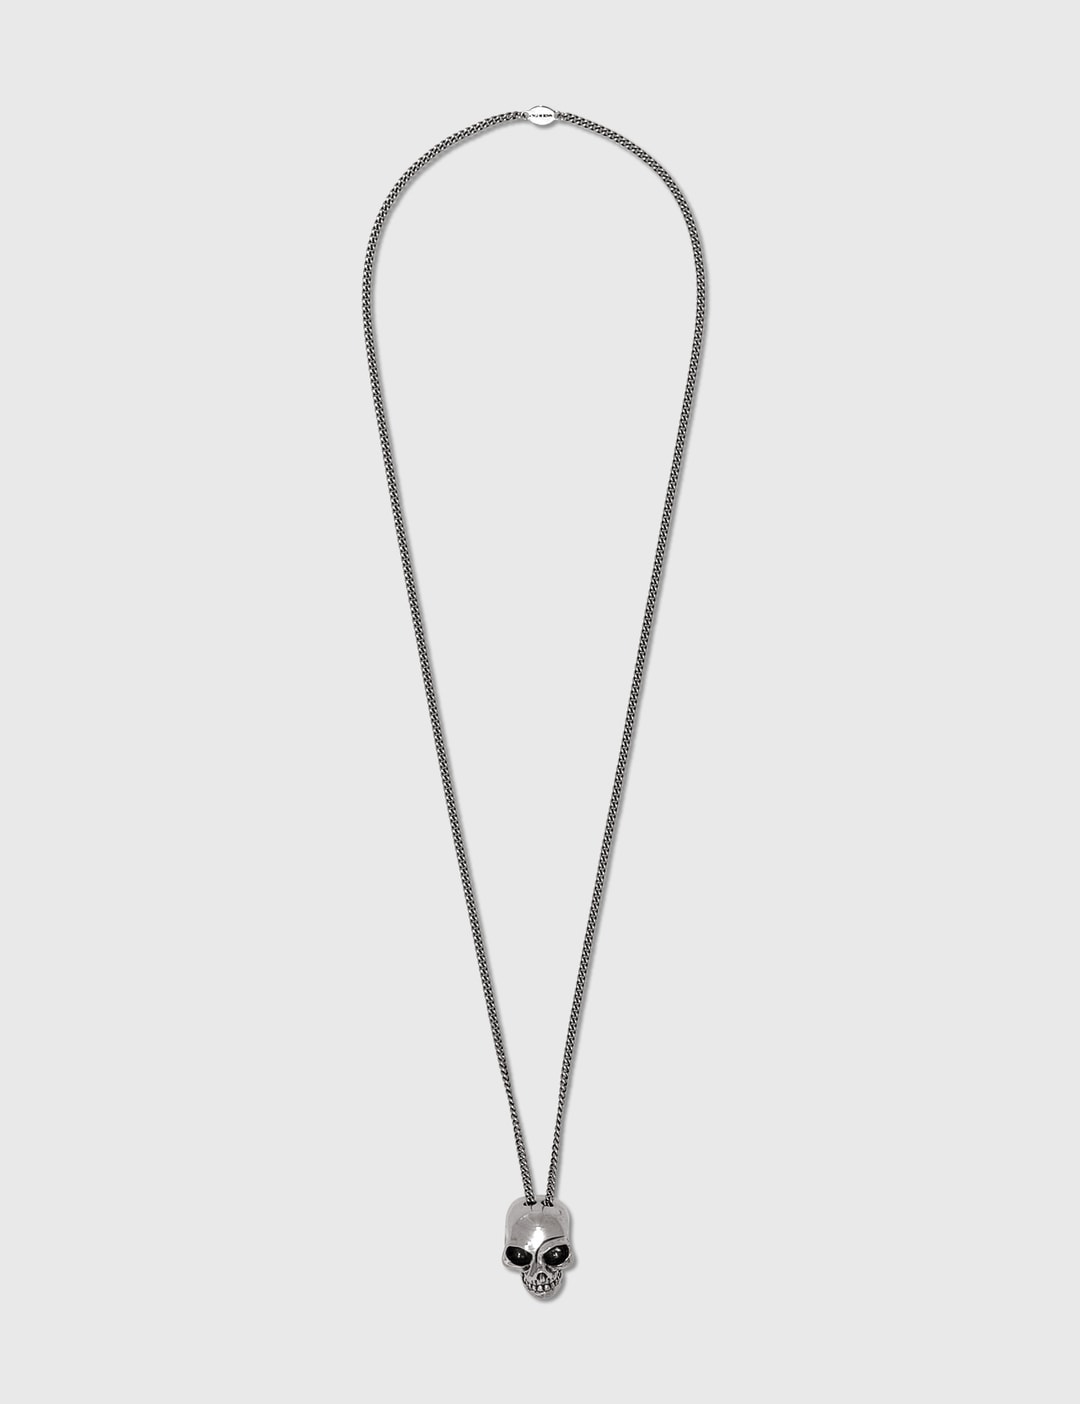 Alexander McQueen - Divided Skull Pendant | HBX - Globally Curated ...